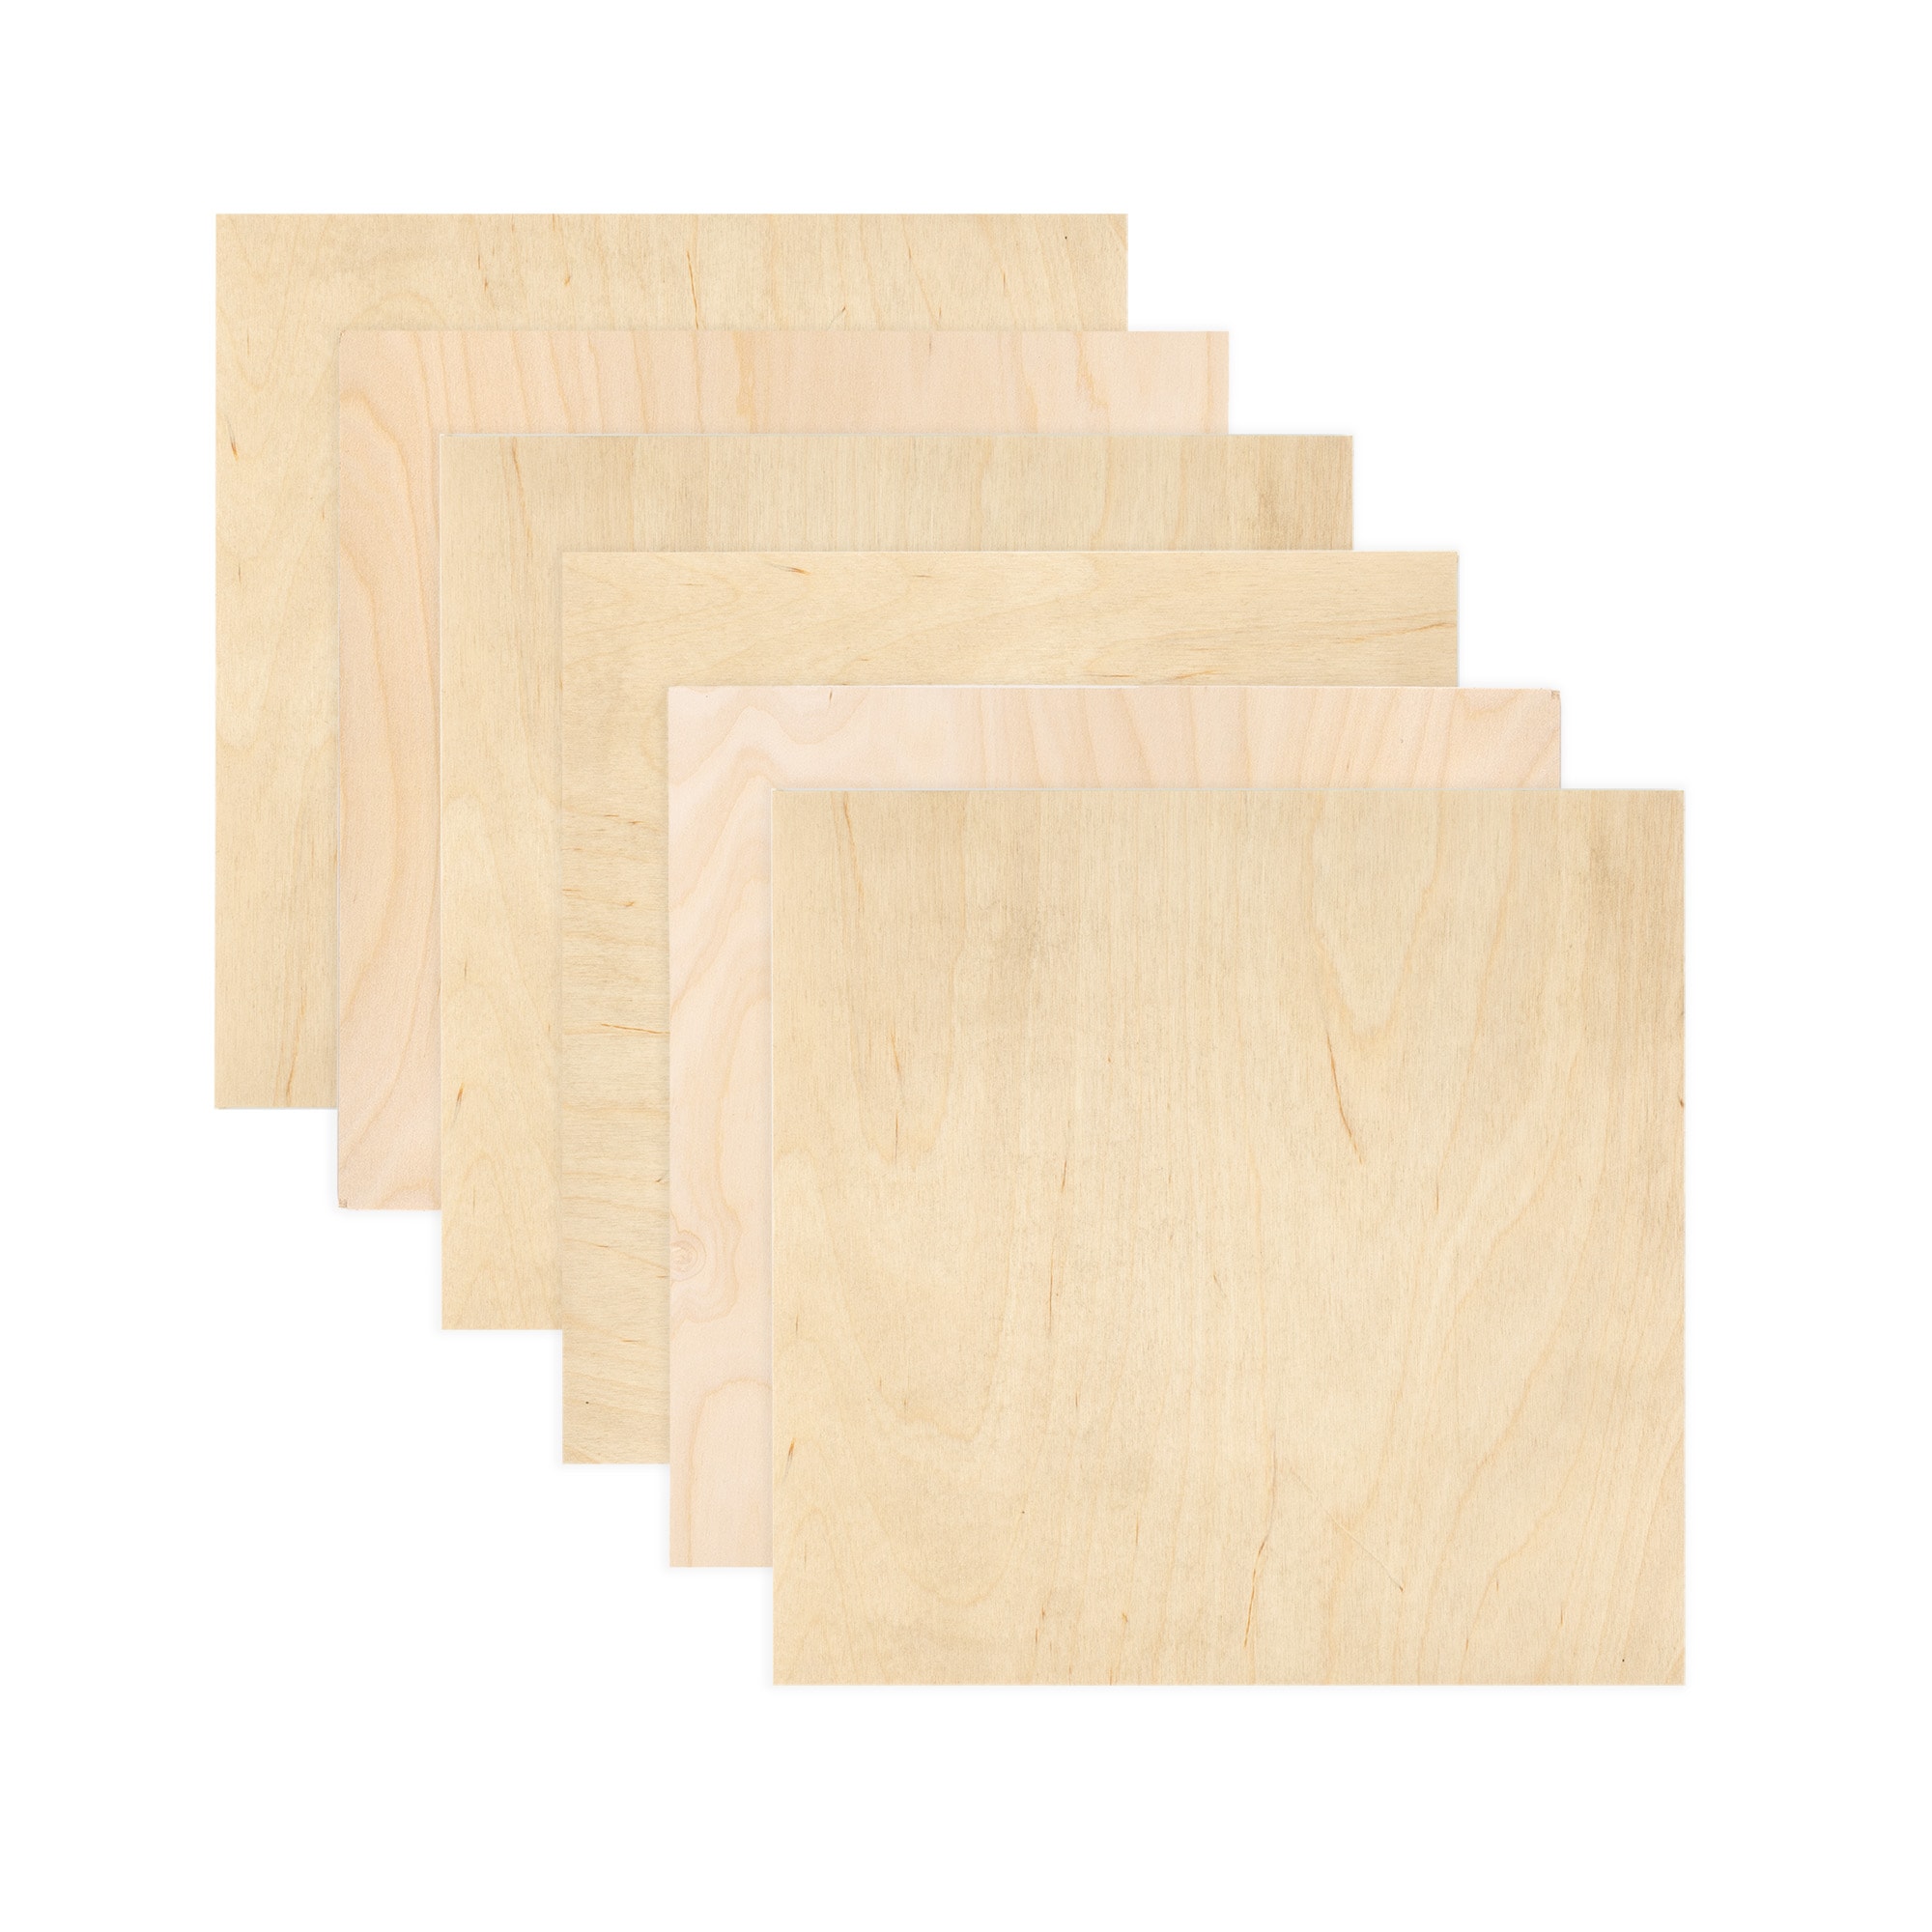 Baltic Birch Plywood, 3 mm 1/8 x 12 x 20 Inch Craft Wood, Pack of